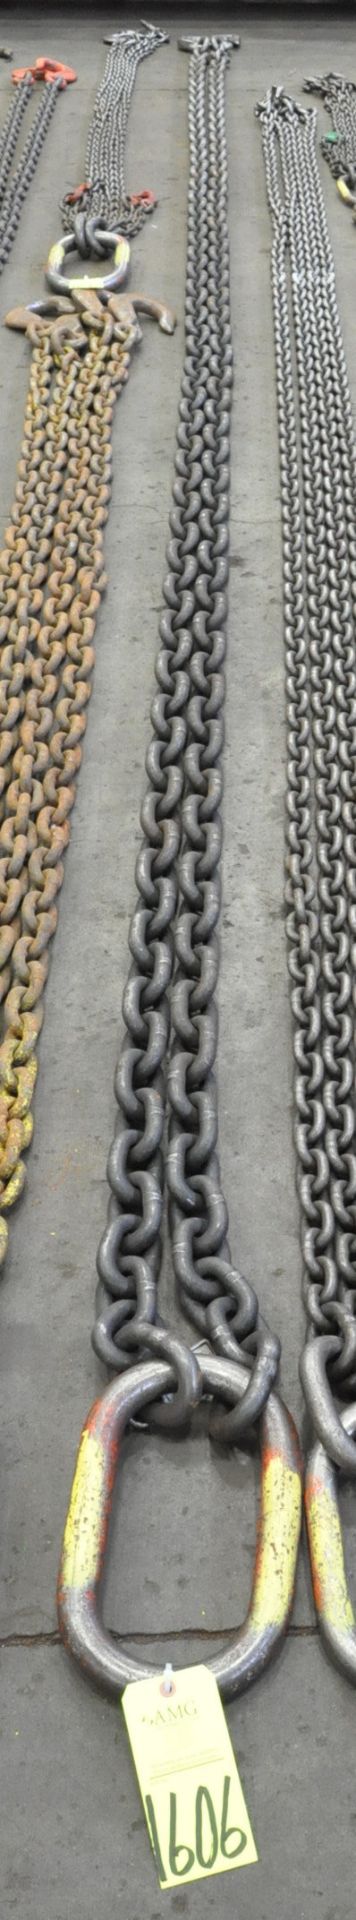 3/4" Link x 20' Long 2-Hook Chain Sling, Cert Tag, (G-23), (Yellow Tag)